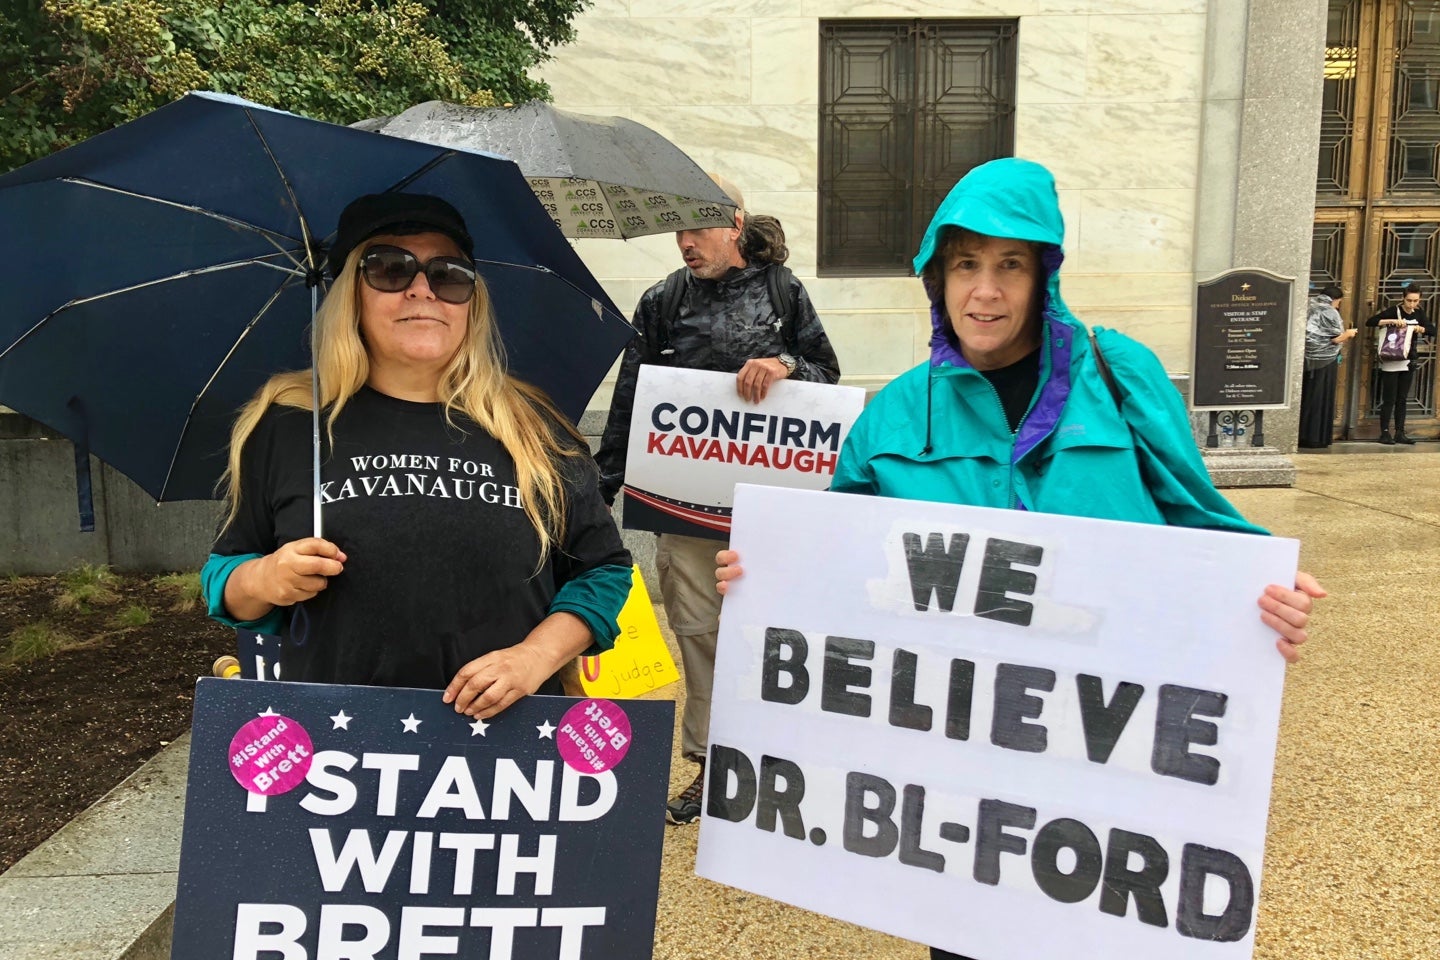 Lourdes Washington (left) and Abby Bolt (right) holding up signs with opposing views in front of the Dirksen Senate Office Building, where the hearing was held. Washington supported Kavanaugh and Bolt supported Ford.